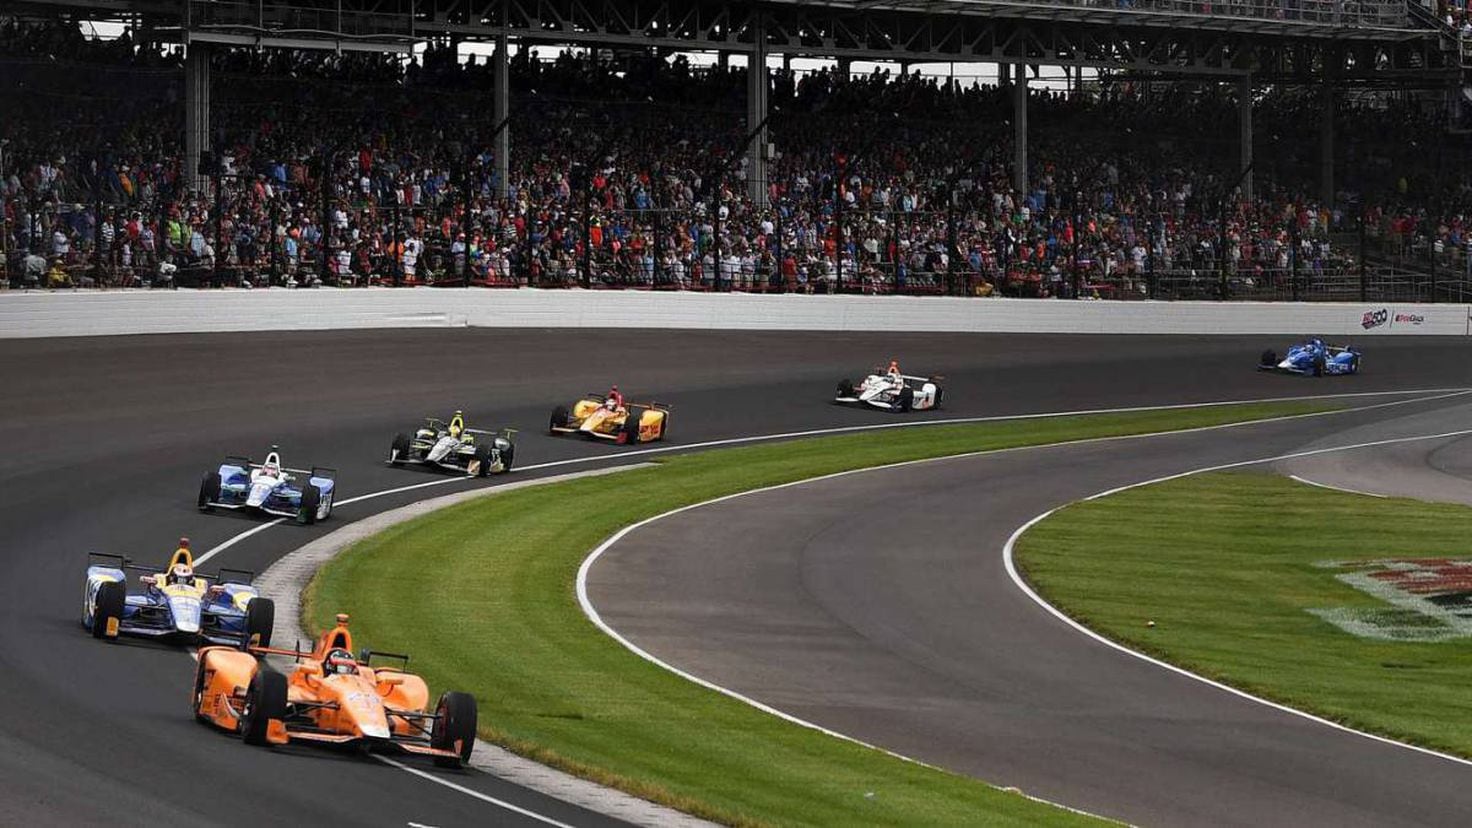 2023 Indy 500 Weather forecast for practice, qualifying and race day